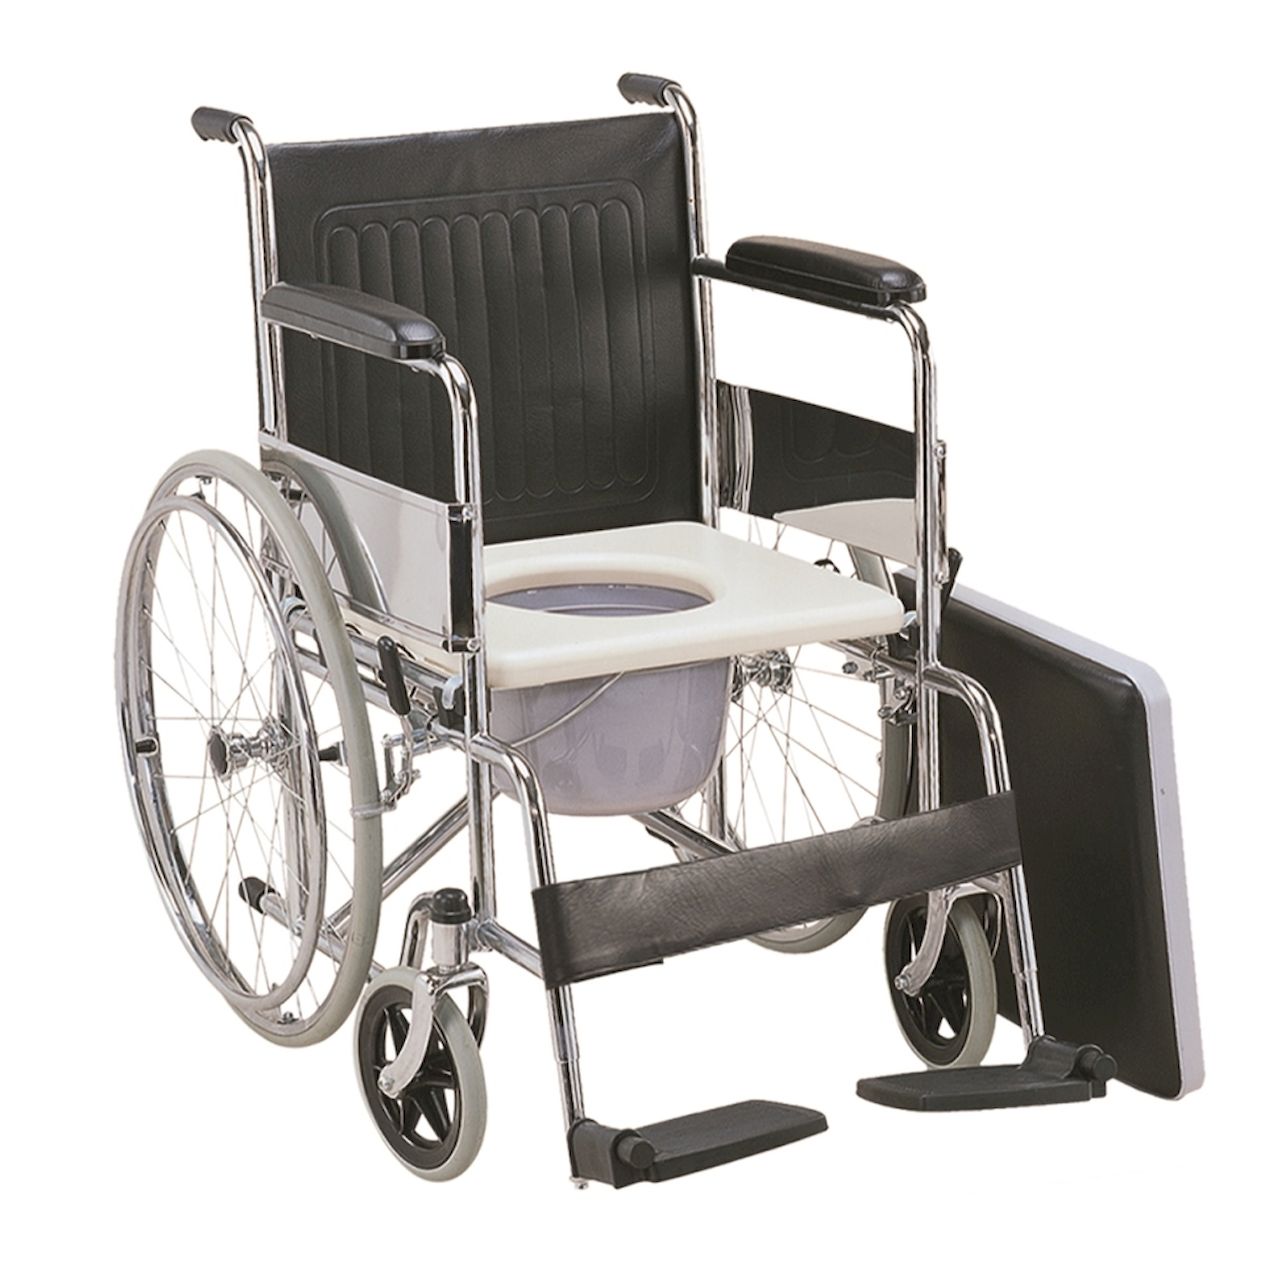 Karma Commode Wheelchair Rainbow 7 On Sale Suppliers, Service Provider in Chirag dilli